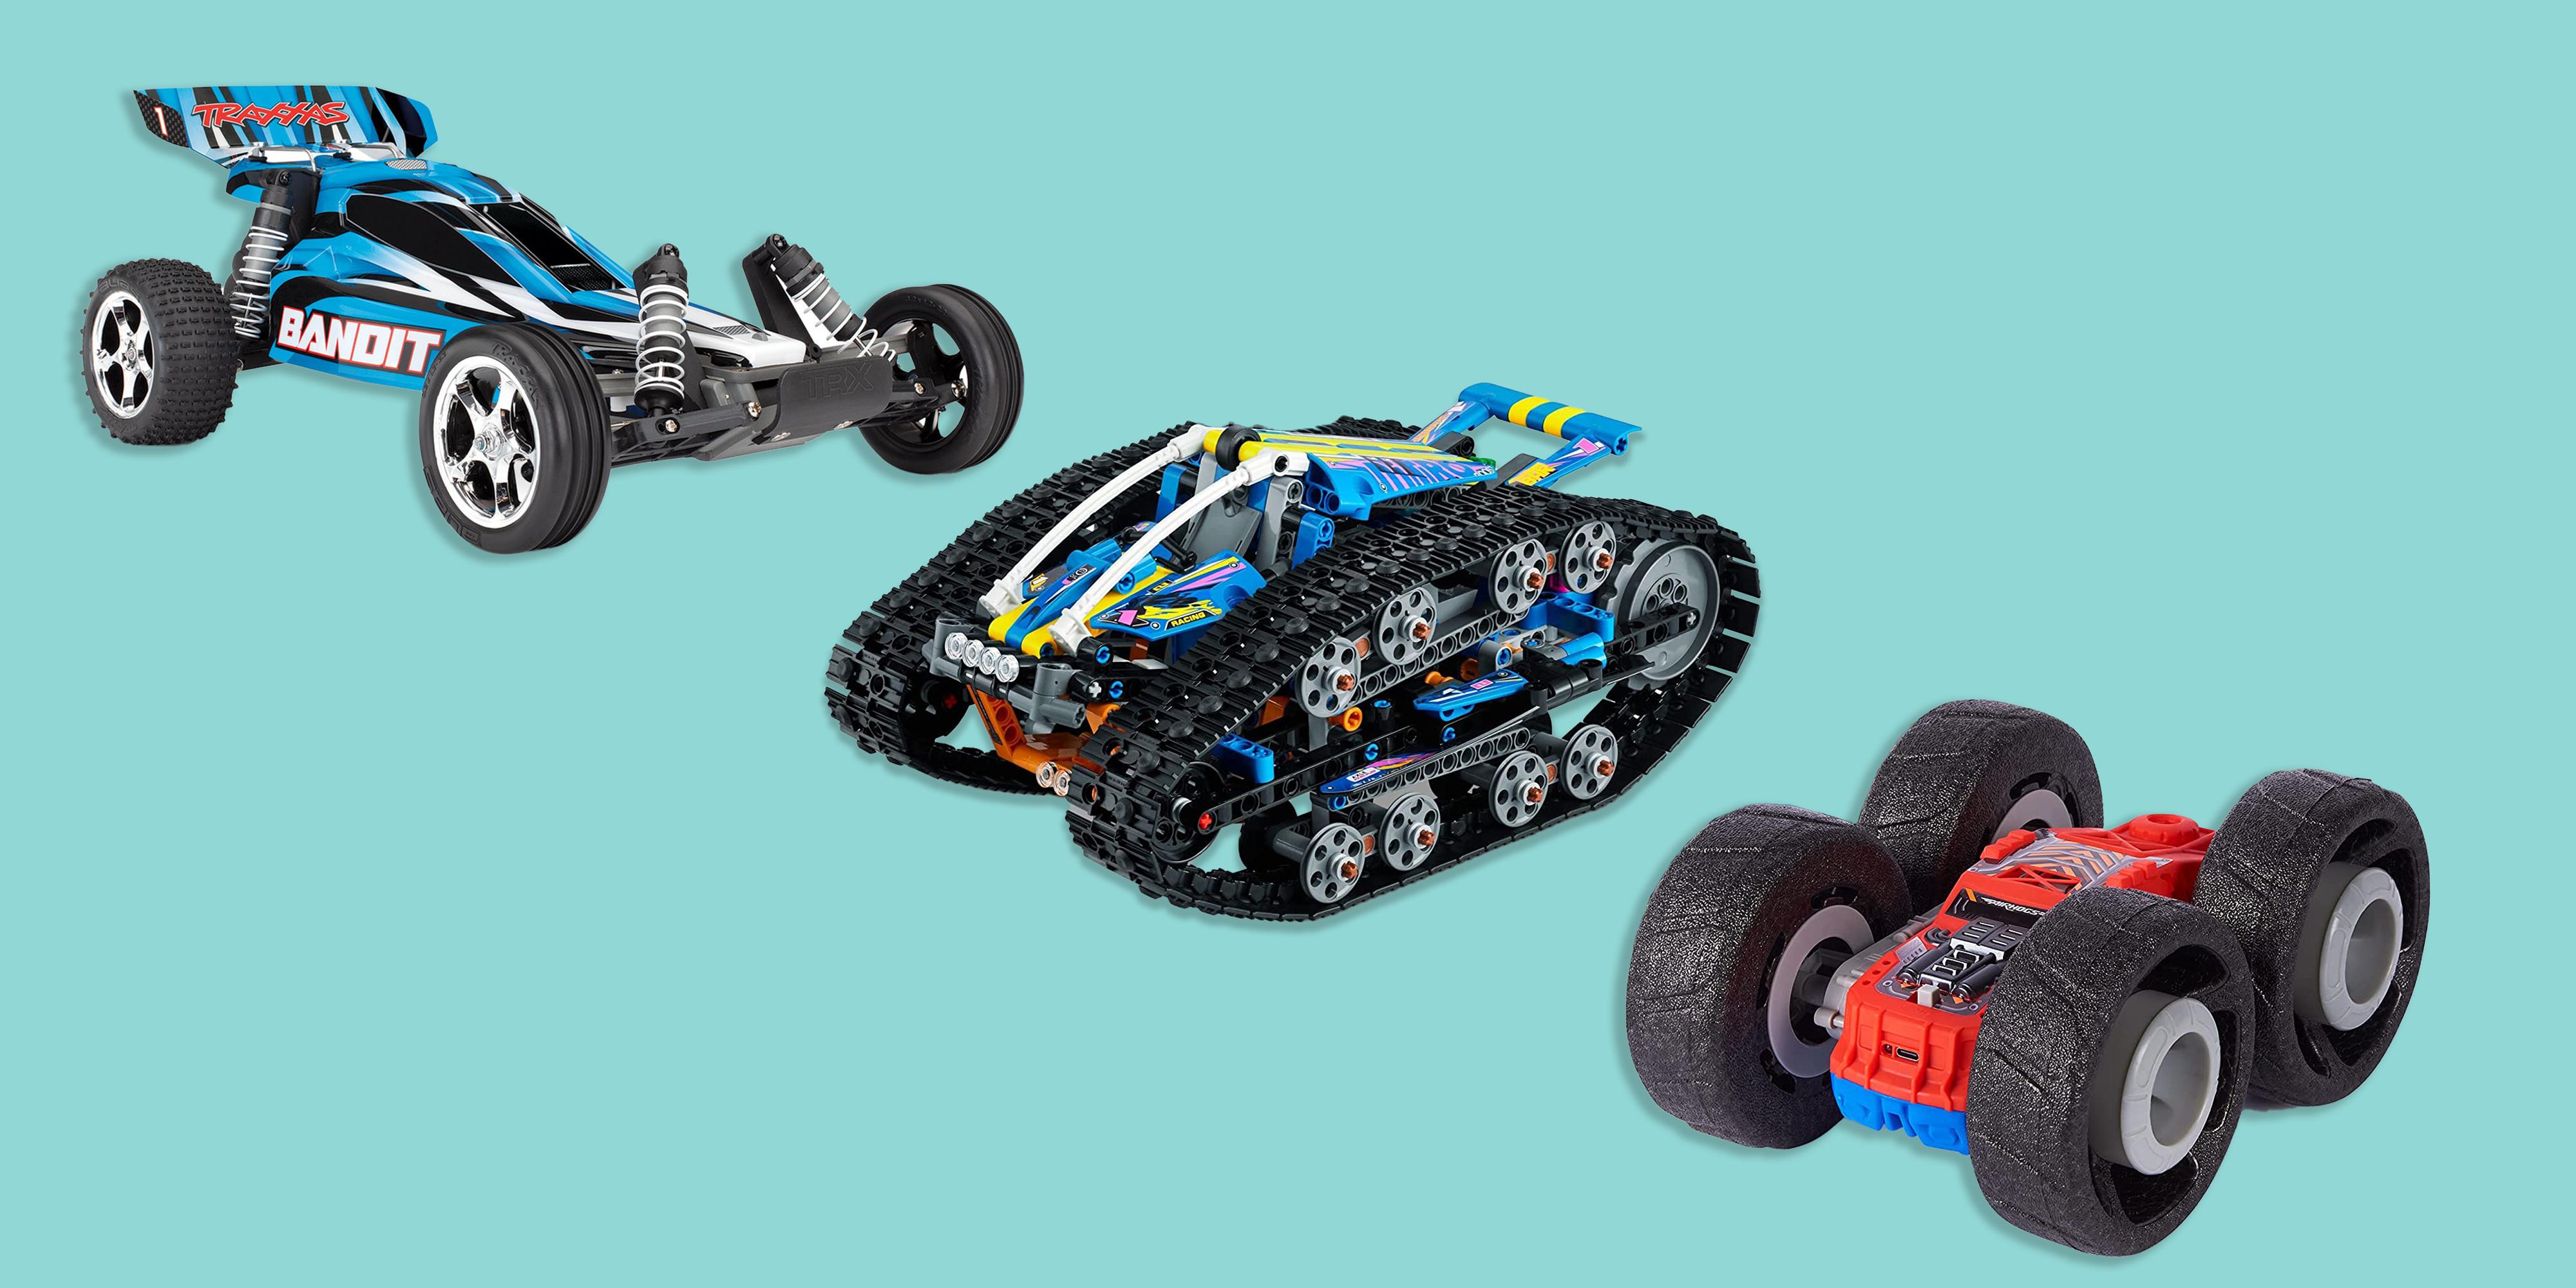 Electric Racing Rc Cars: Top Brands for Electric Racing RC Cars